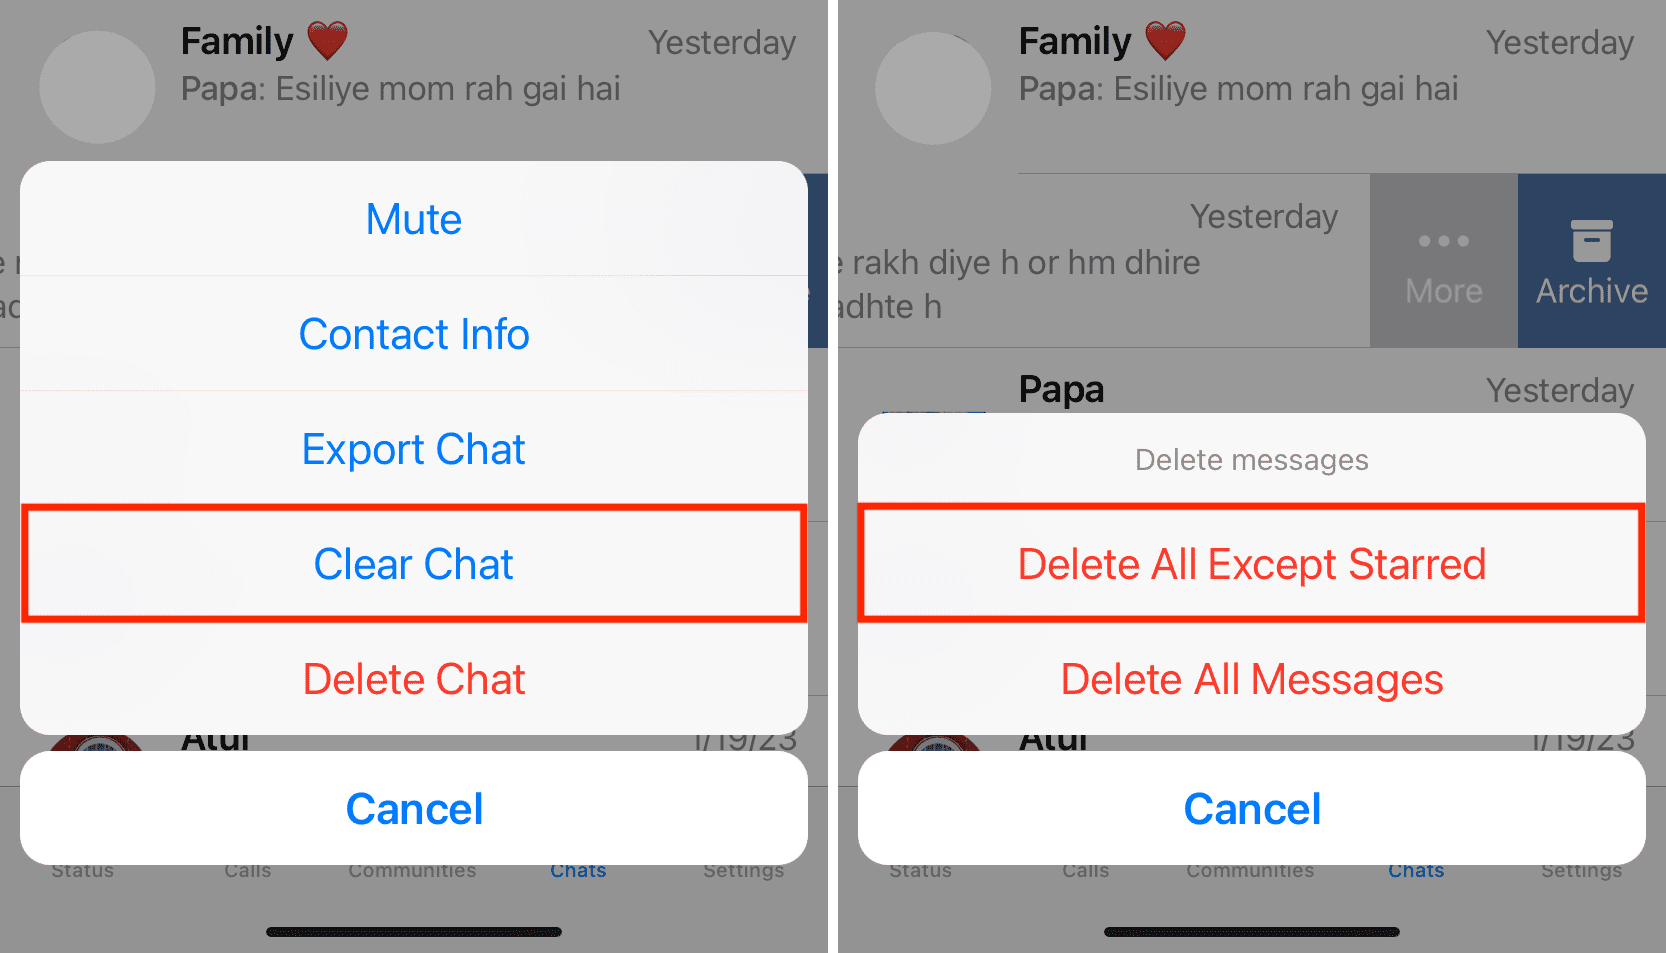 Delete All Except Starred messages on WhatsApp